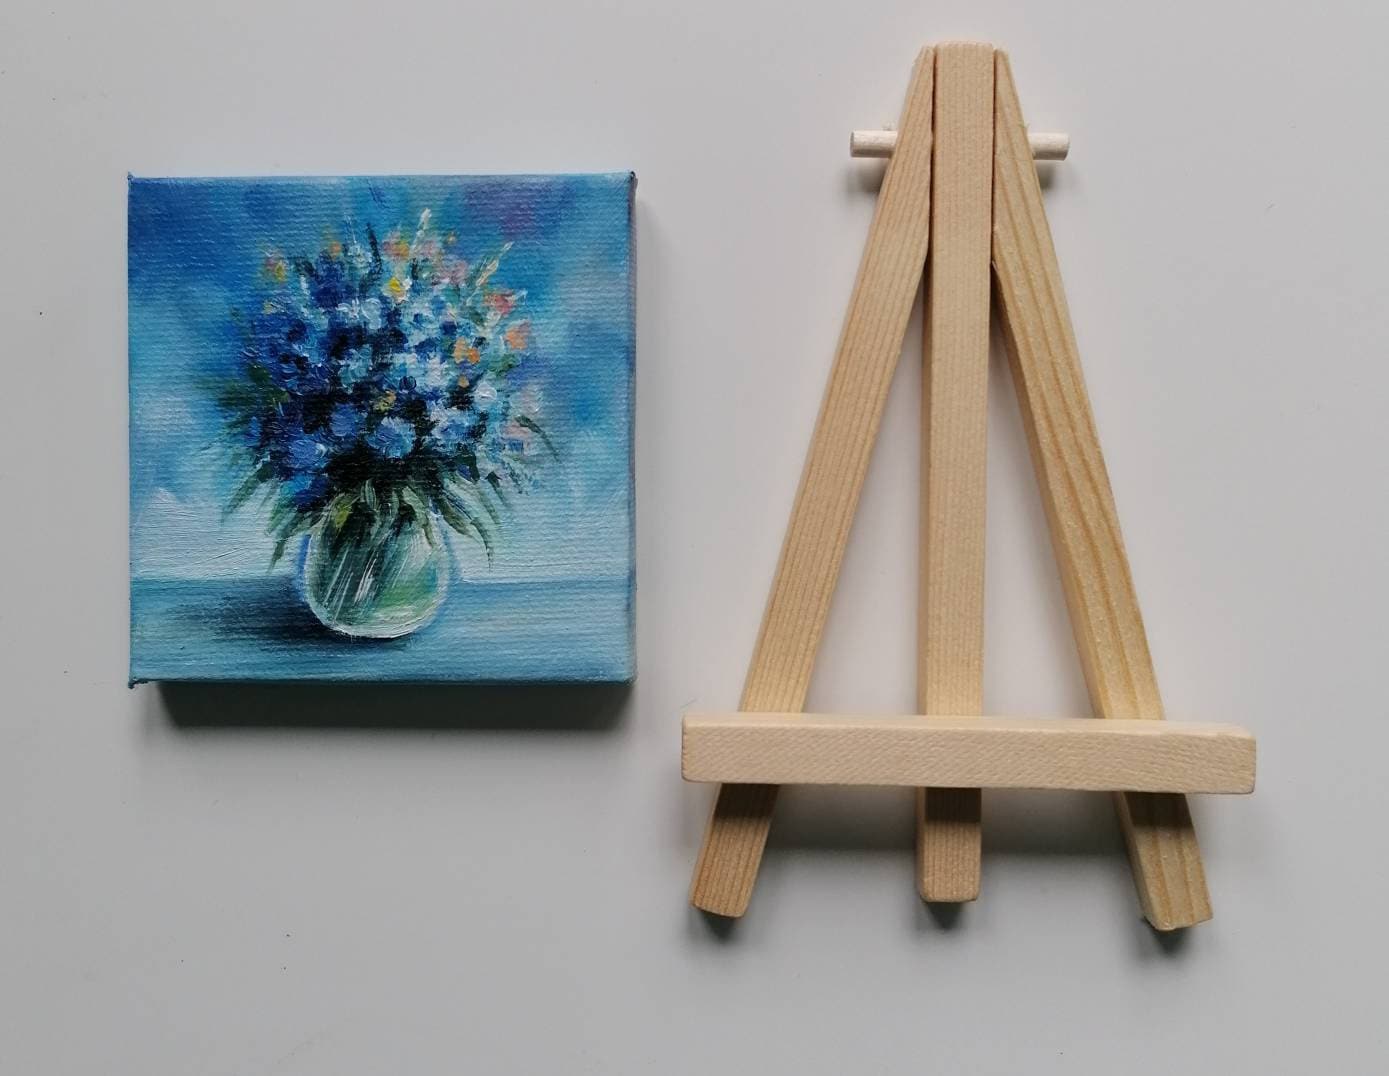 Blue Cornflowers Mini canvas painting with easel still life original Small floral art